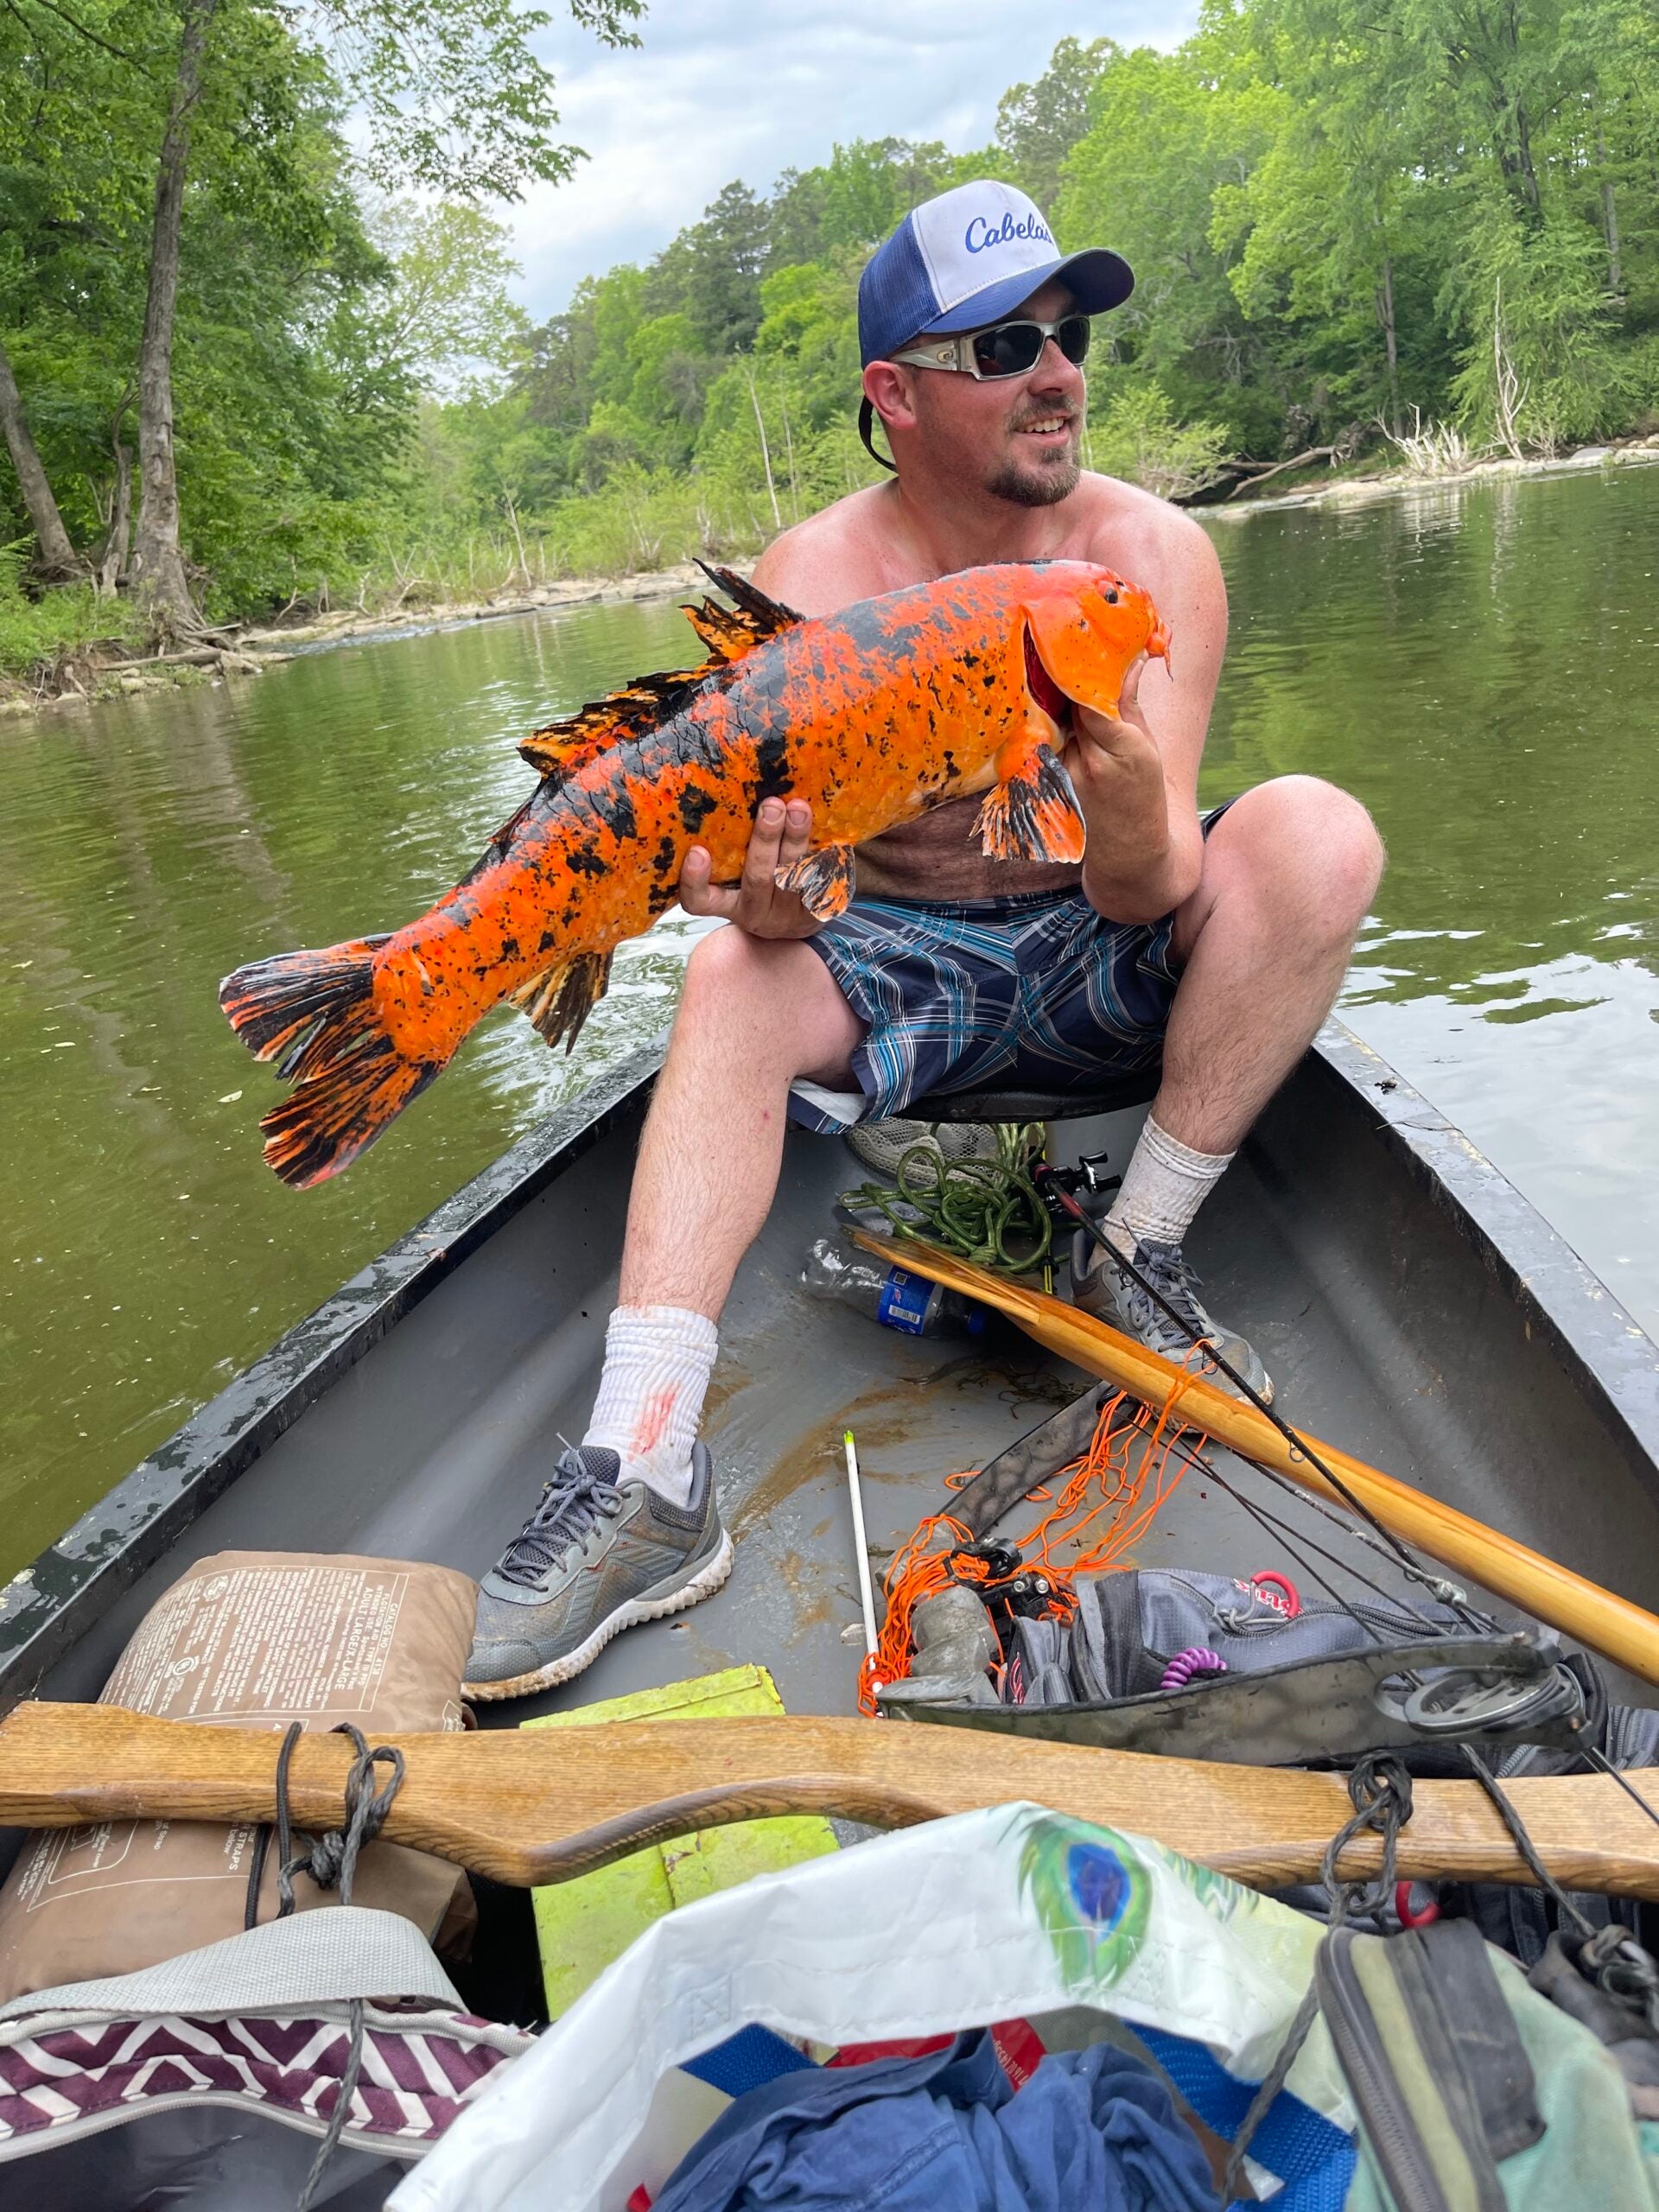 the man sits in small canoes holding large koi